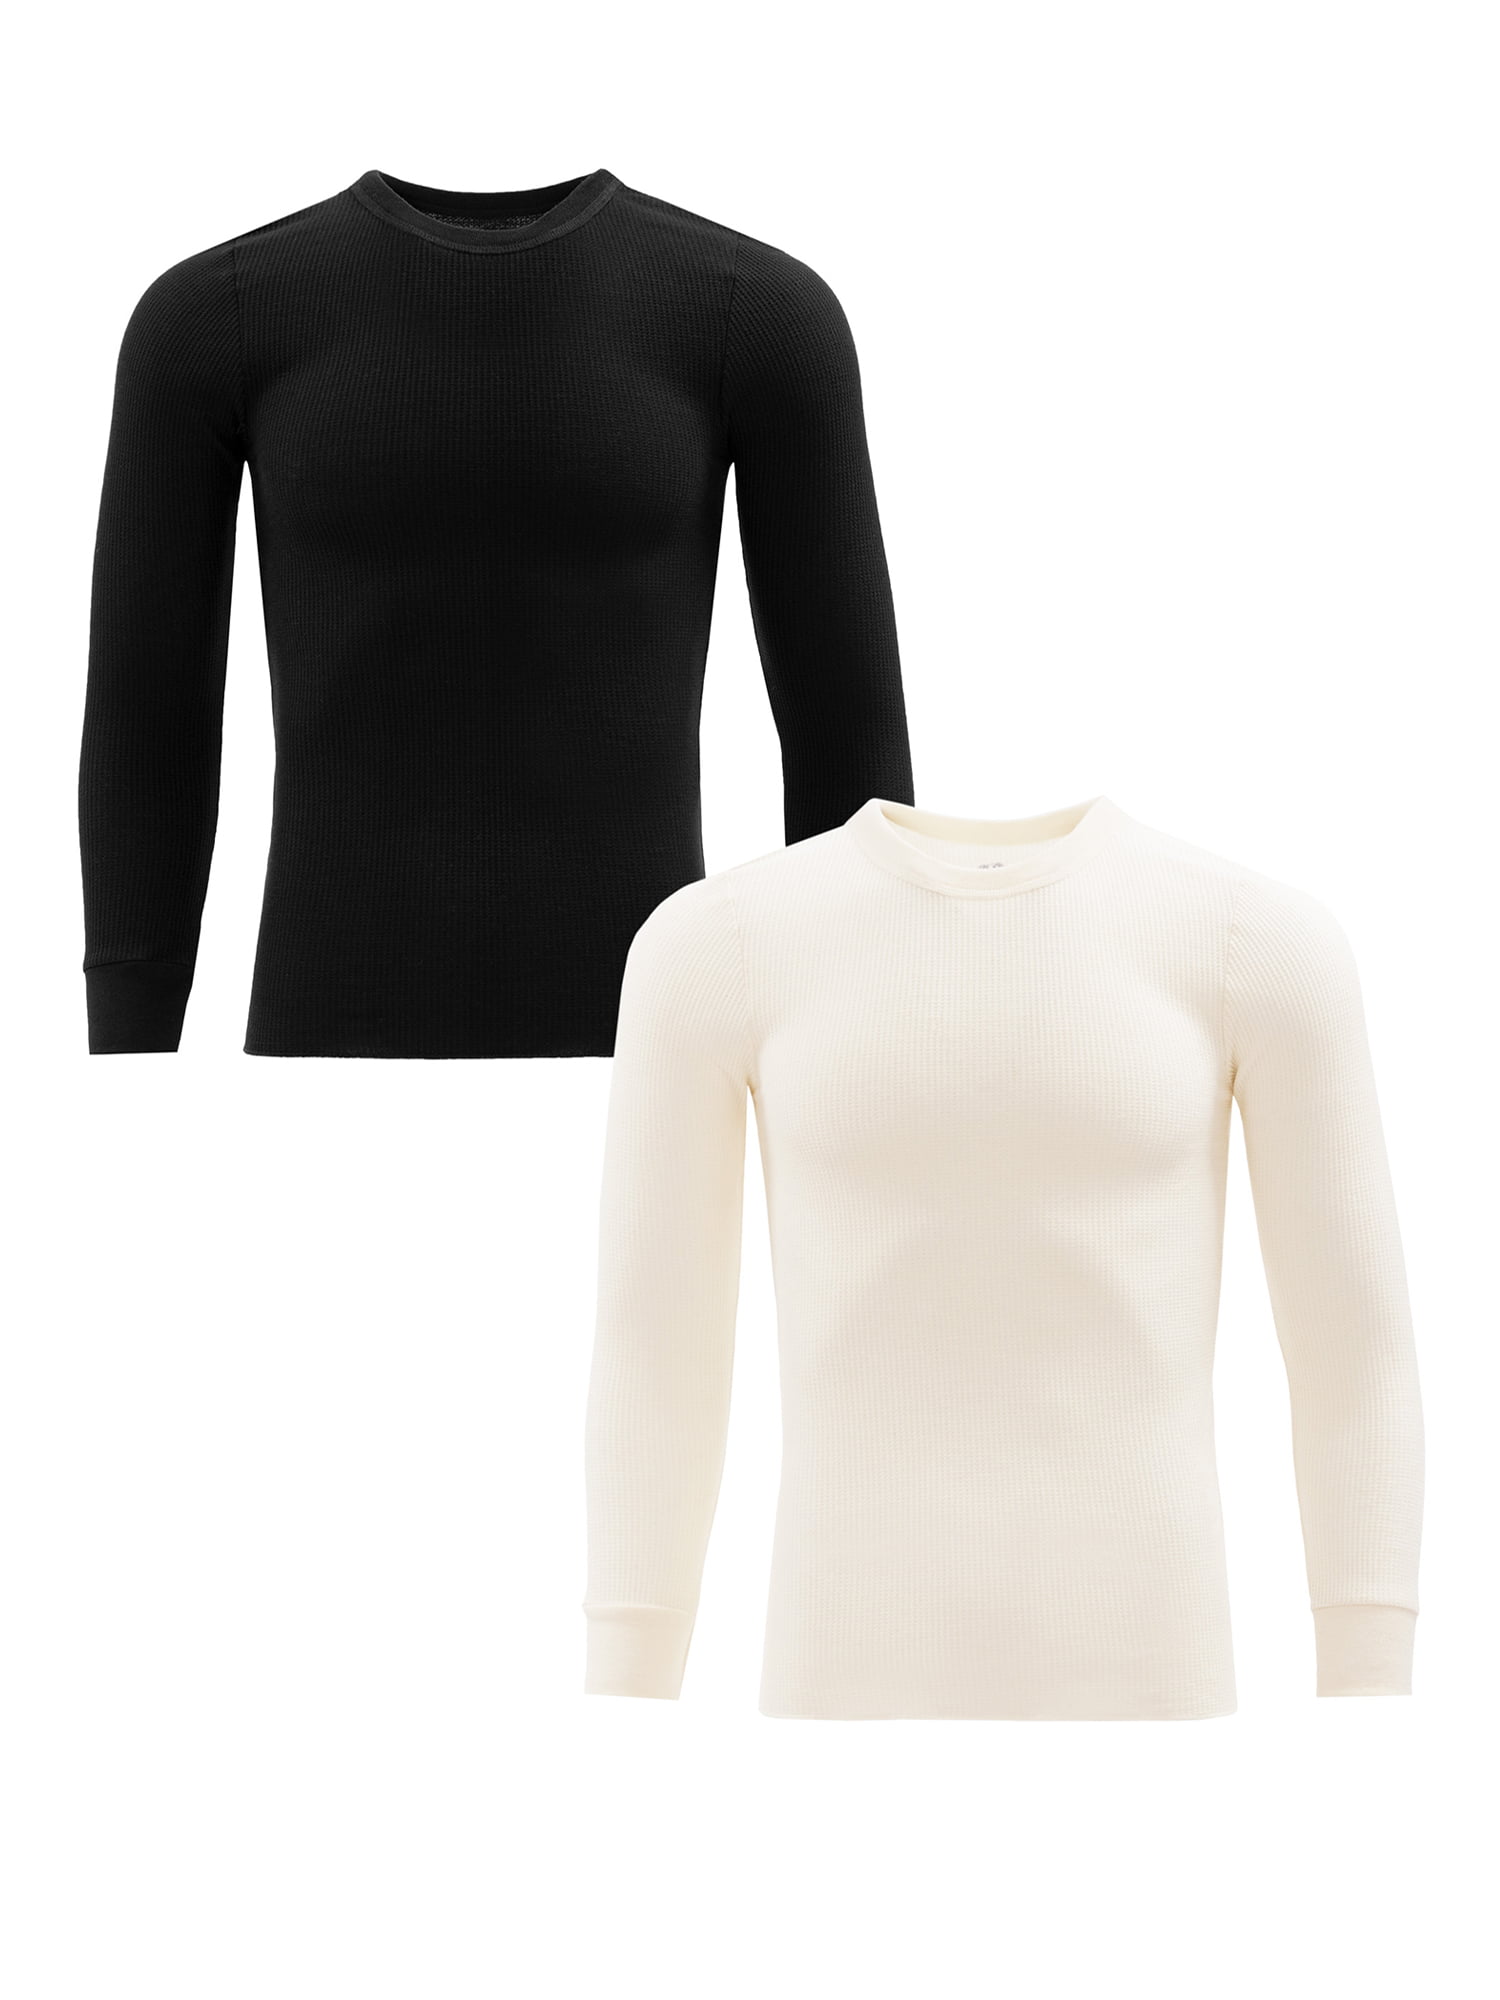 Fruit of the Loom Boys Performance Base Layer Thermal Top and Bottom Black L 